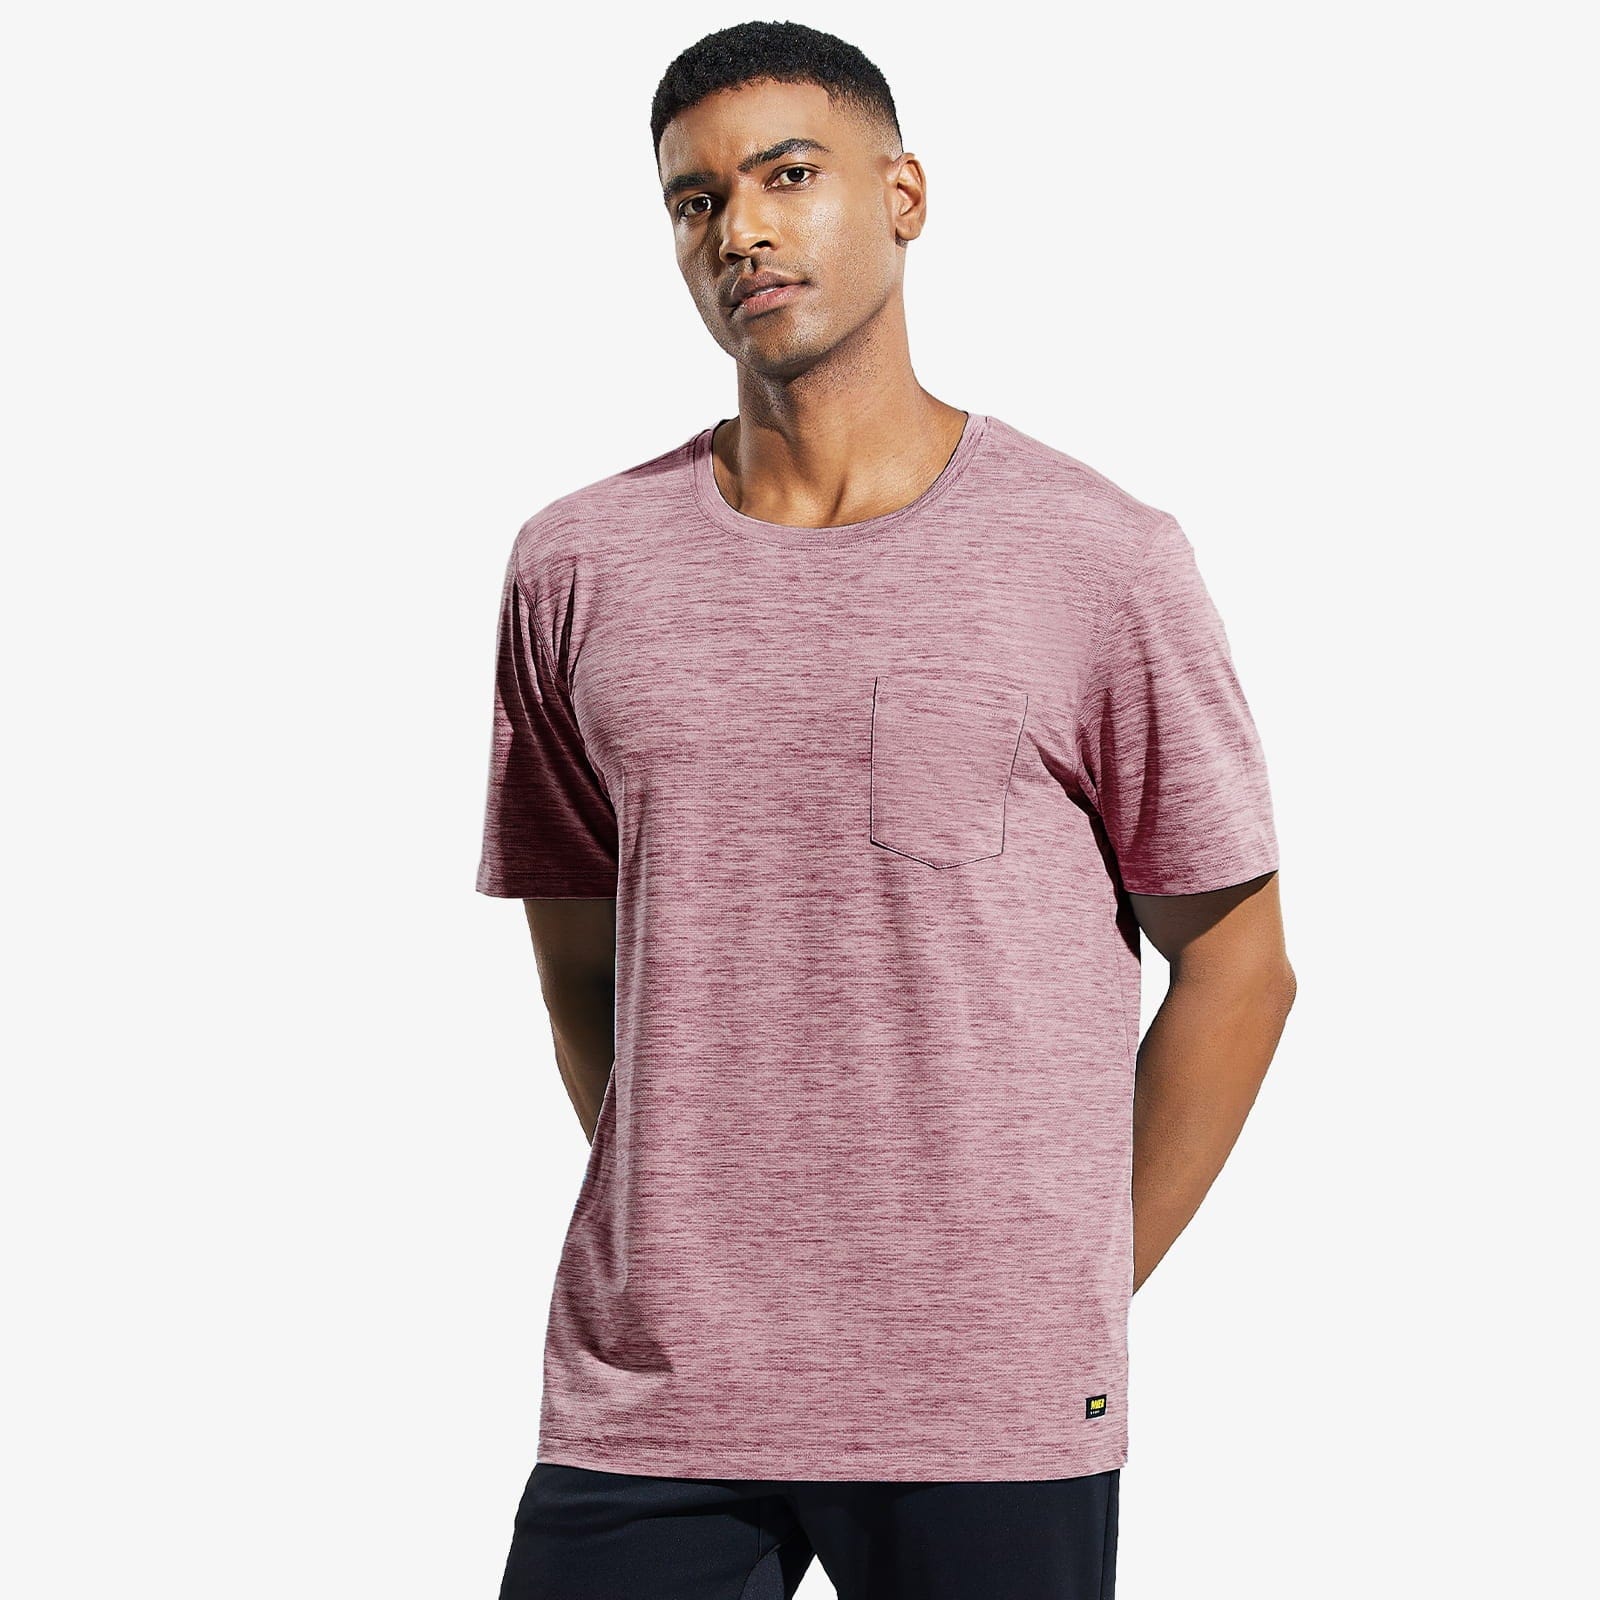 Men's Dry Fit Athletic T-Shirt with Pocket Men Shirts Heather Dusty Pink / S MIER